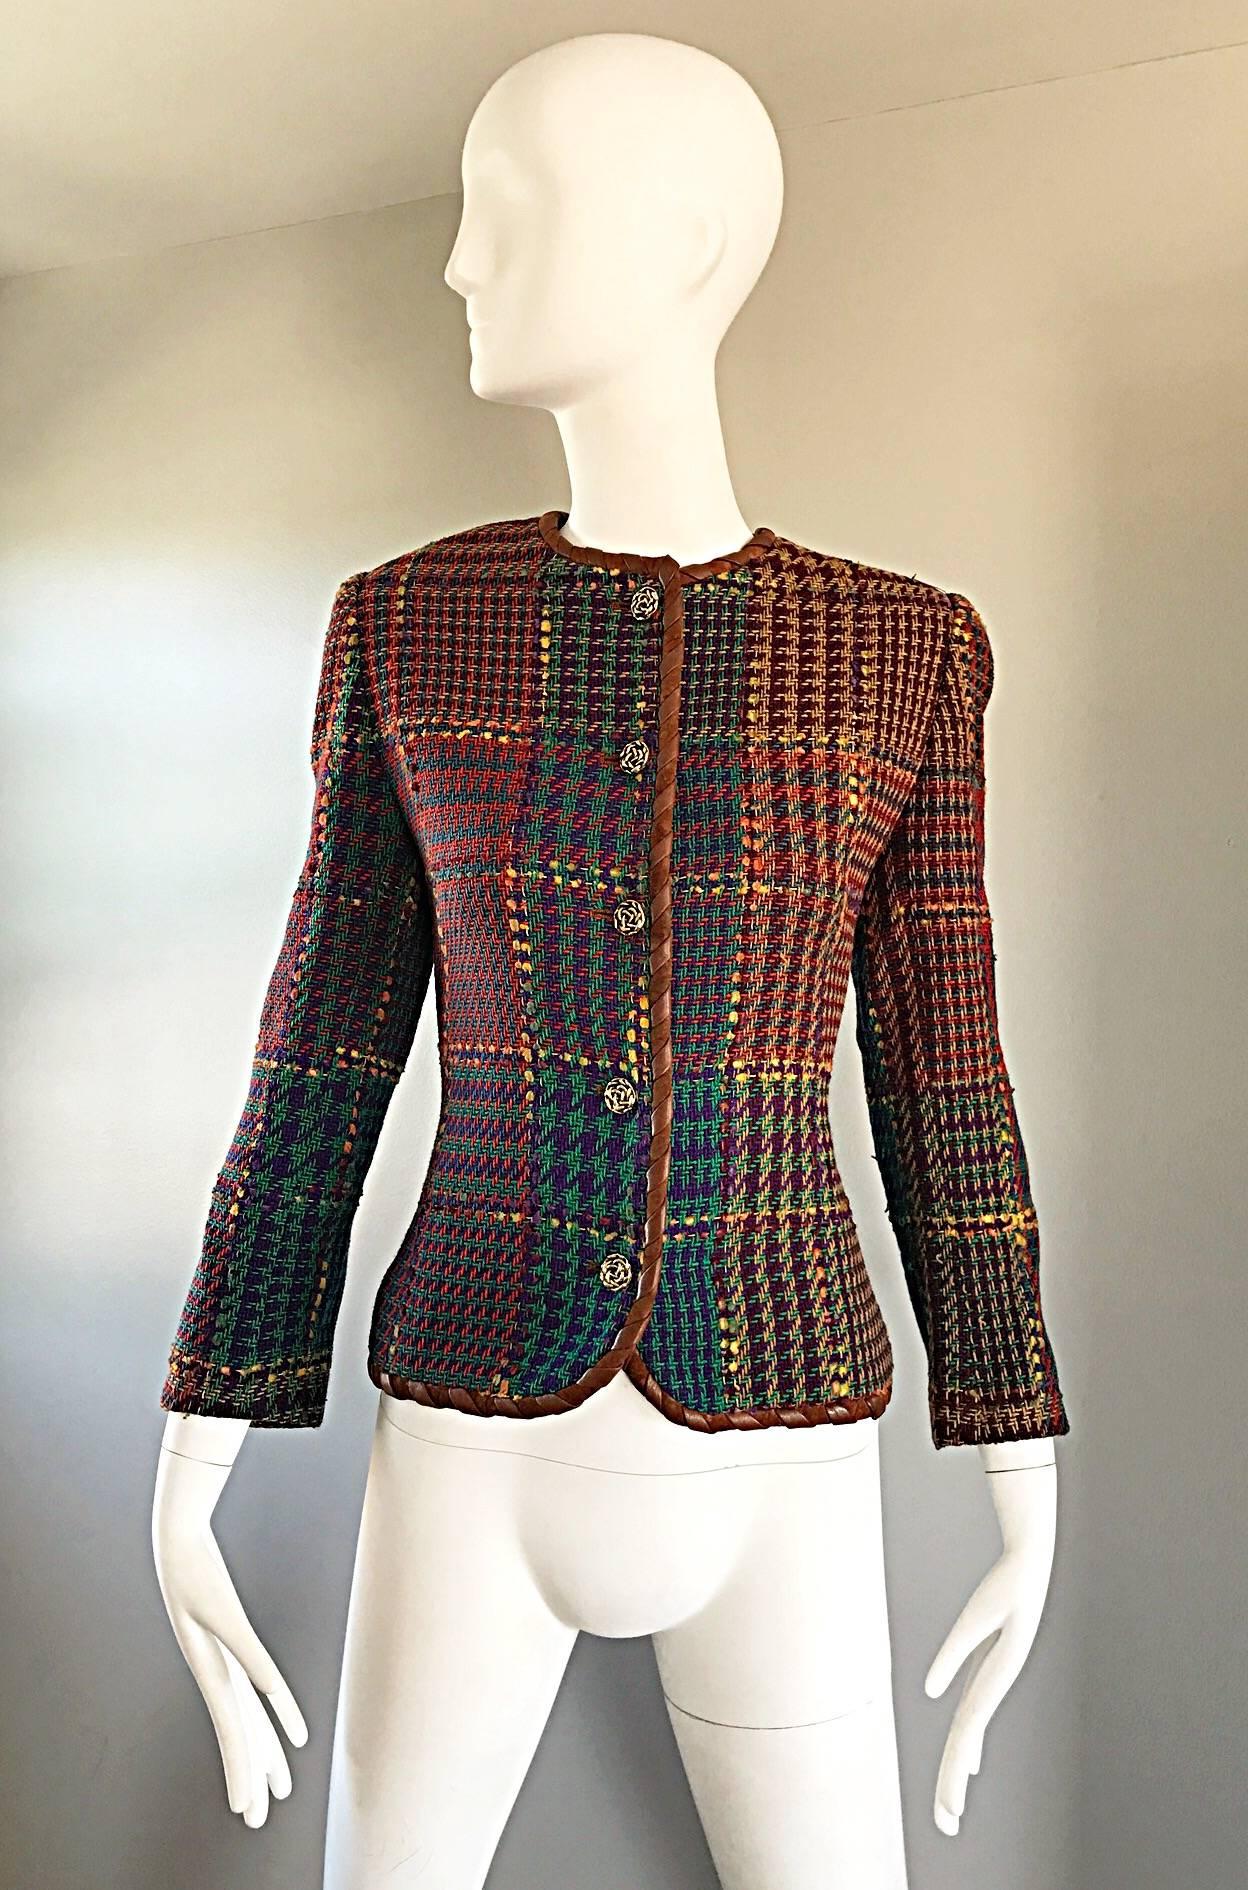 Chic vintage 90s EMANUEL UNGARO colorful autumnal herringbone blazer! Features warm tone of orange, purple, green, blue, and yellow throughout. Trimmed with saddle colored whip stitch leather. Decorative brass buttons up the bodice. Fully lined.